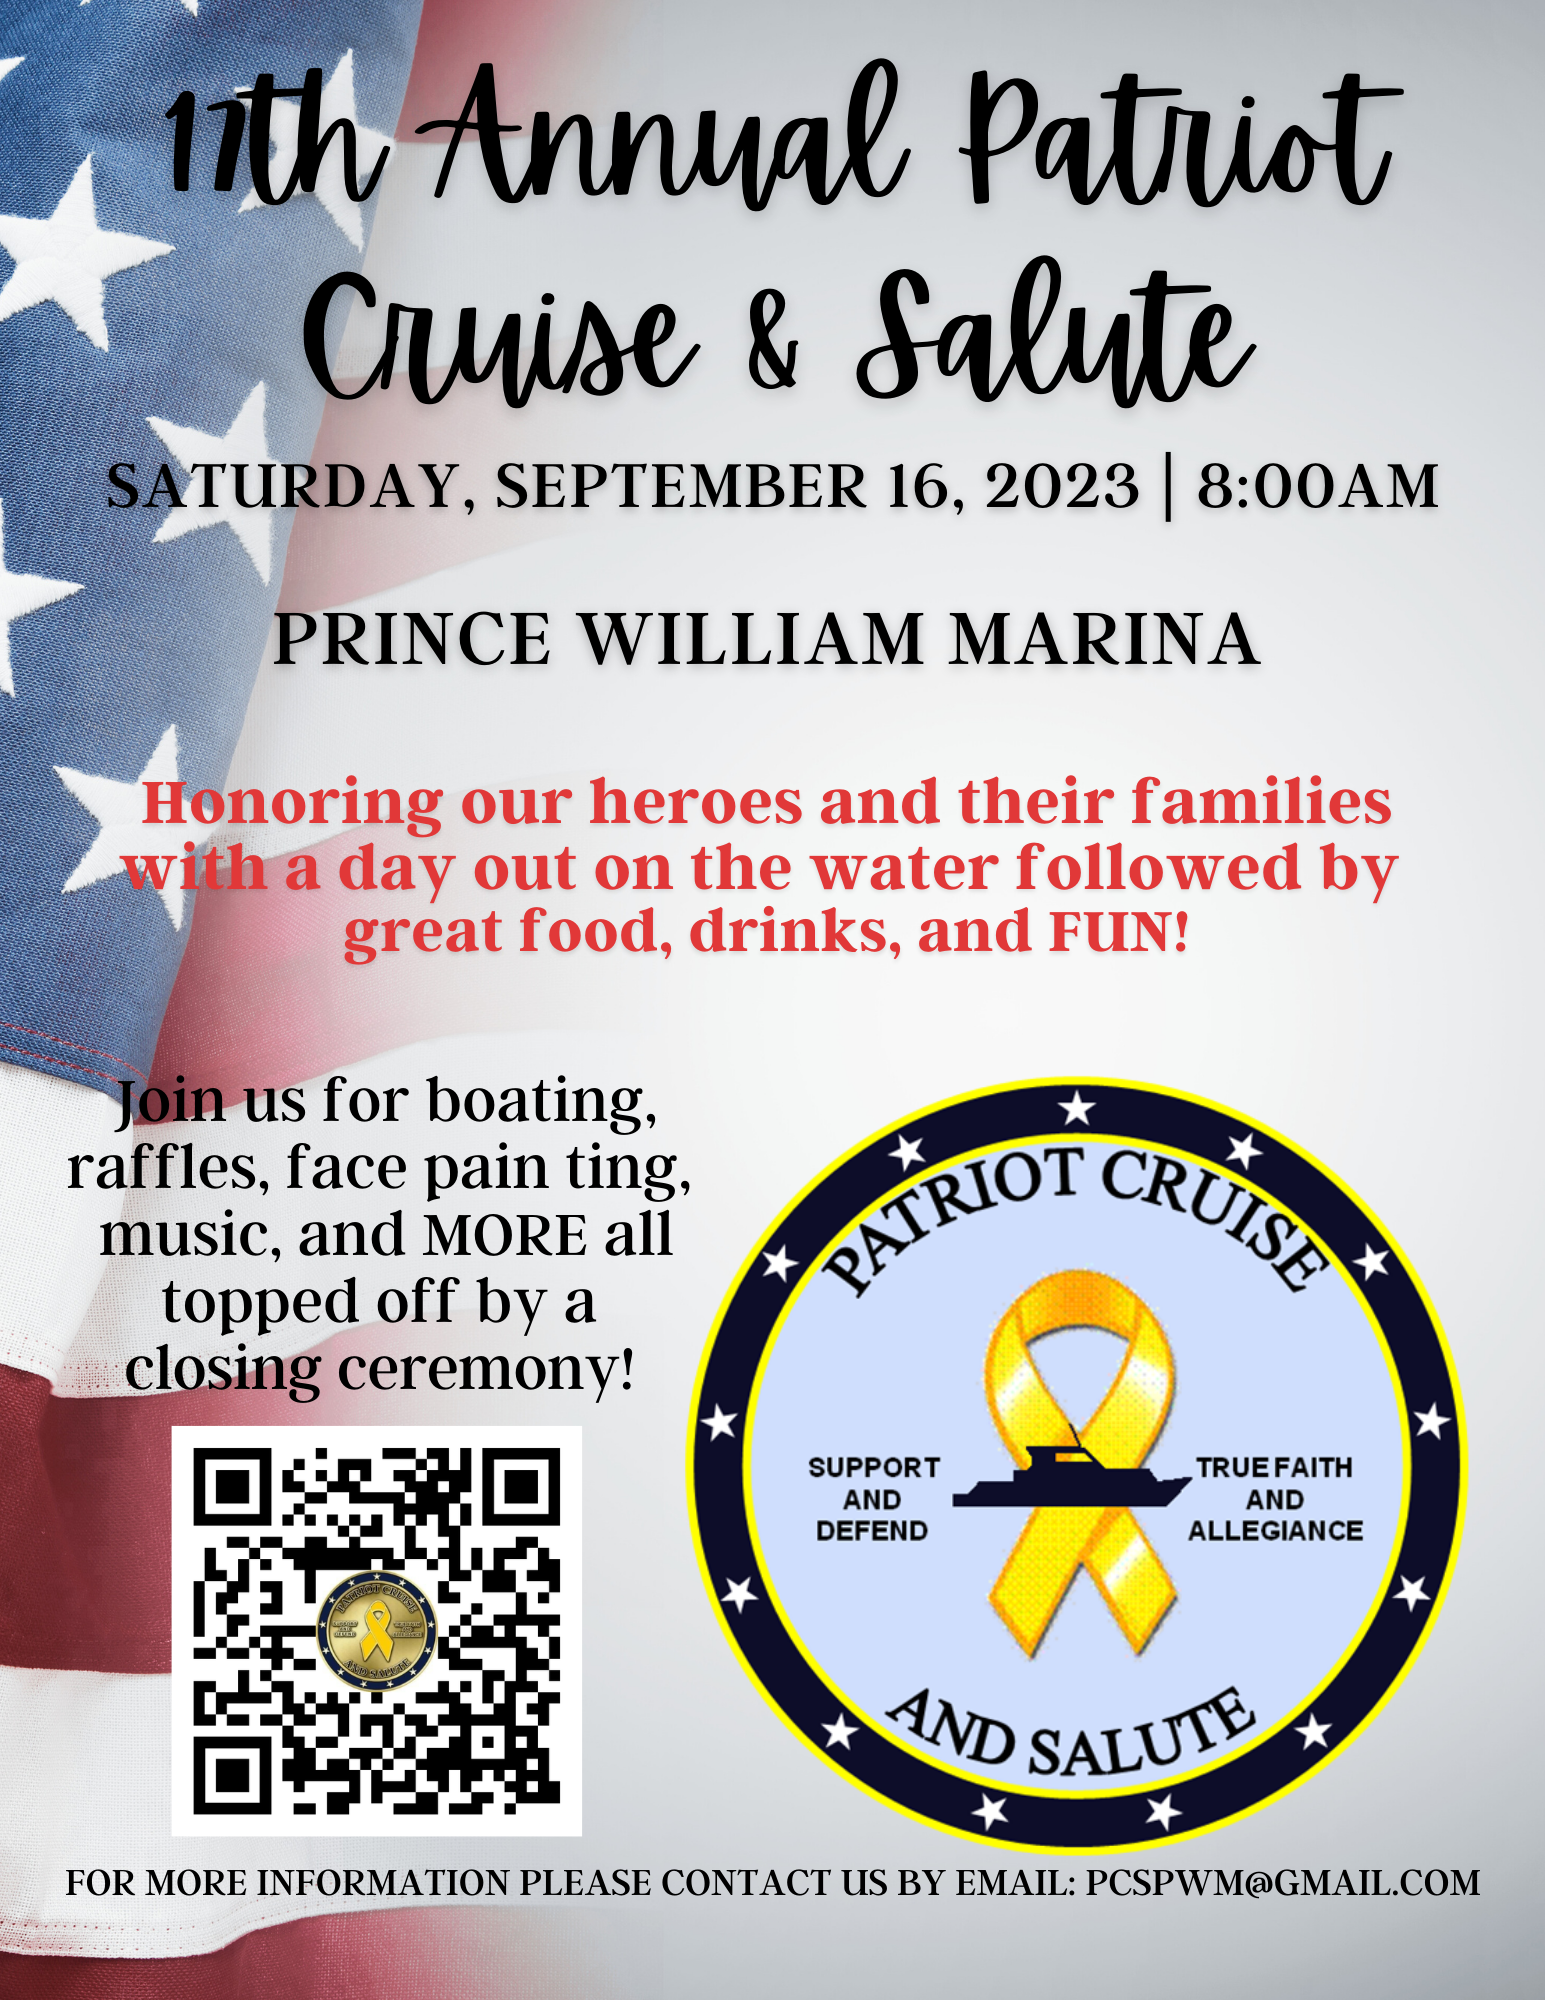 <h1 class="tribe-events-single-event-title">17th Annual Patriot Cruise and Salute</h1>